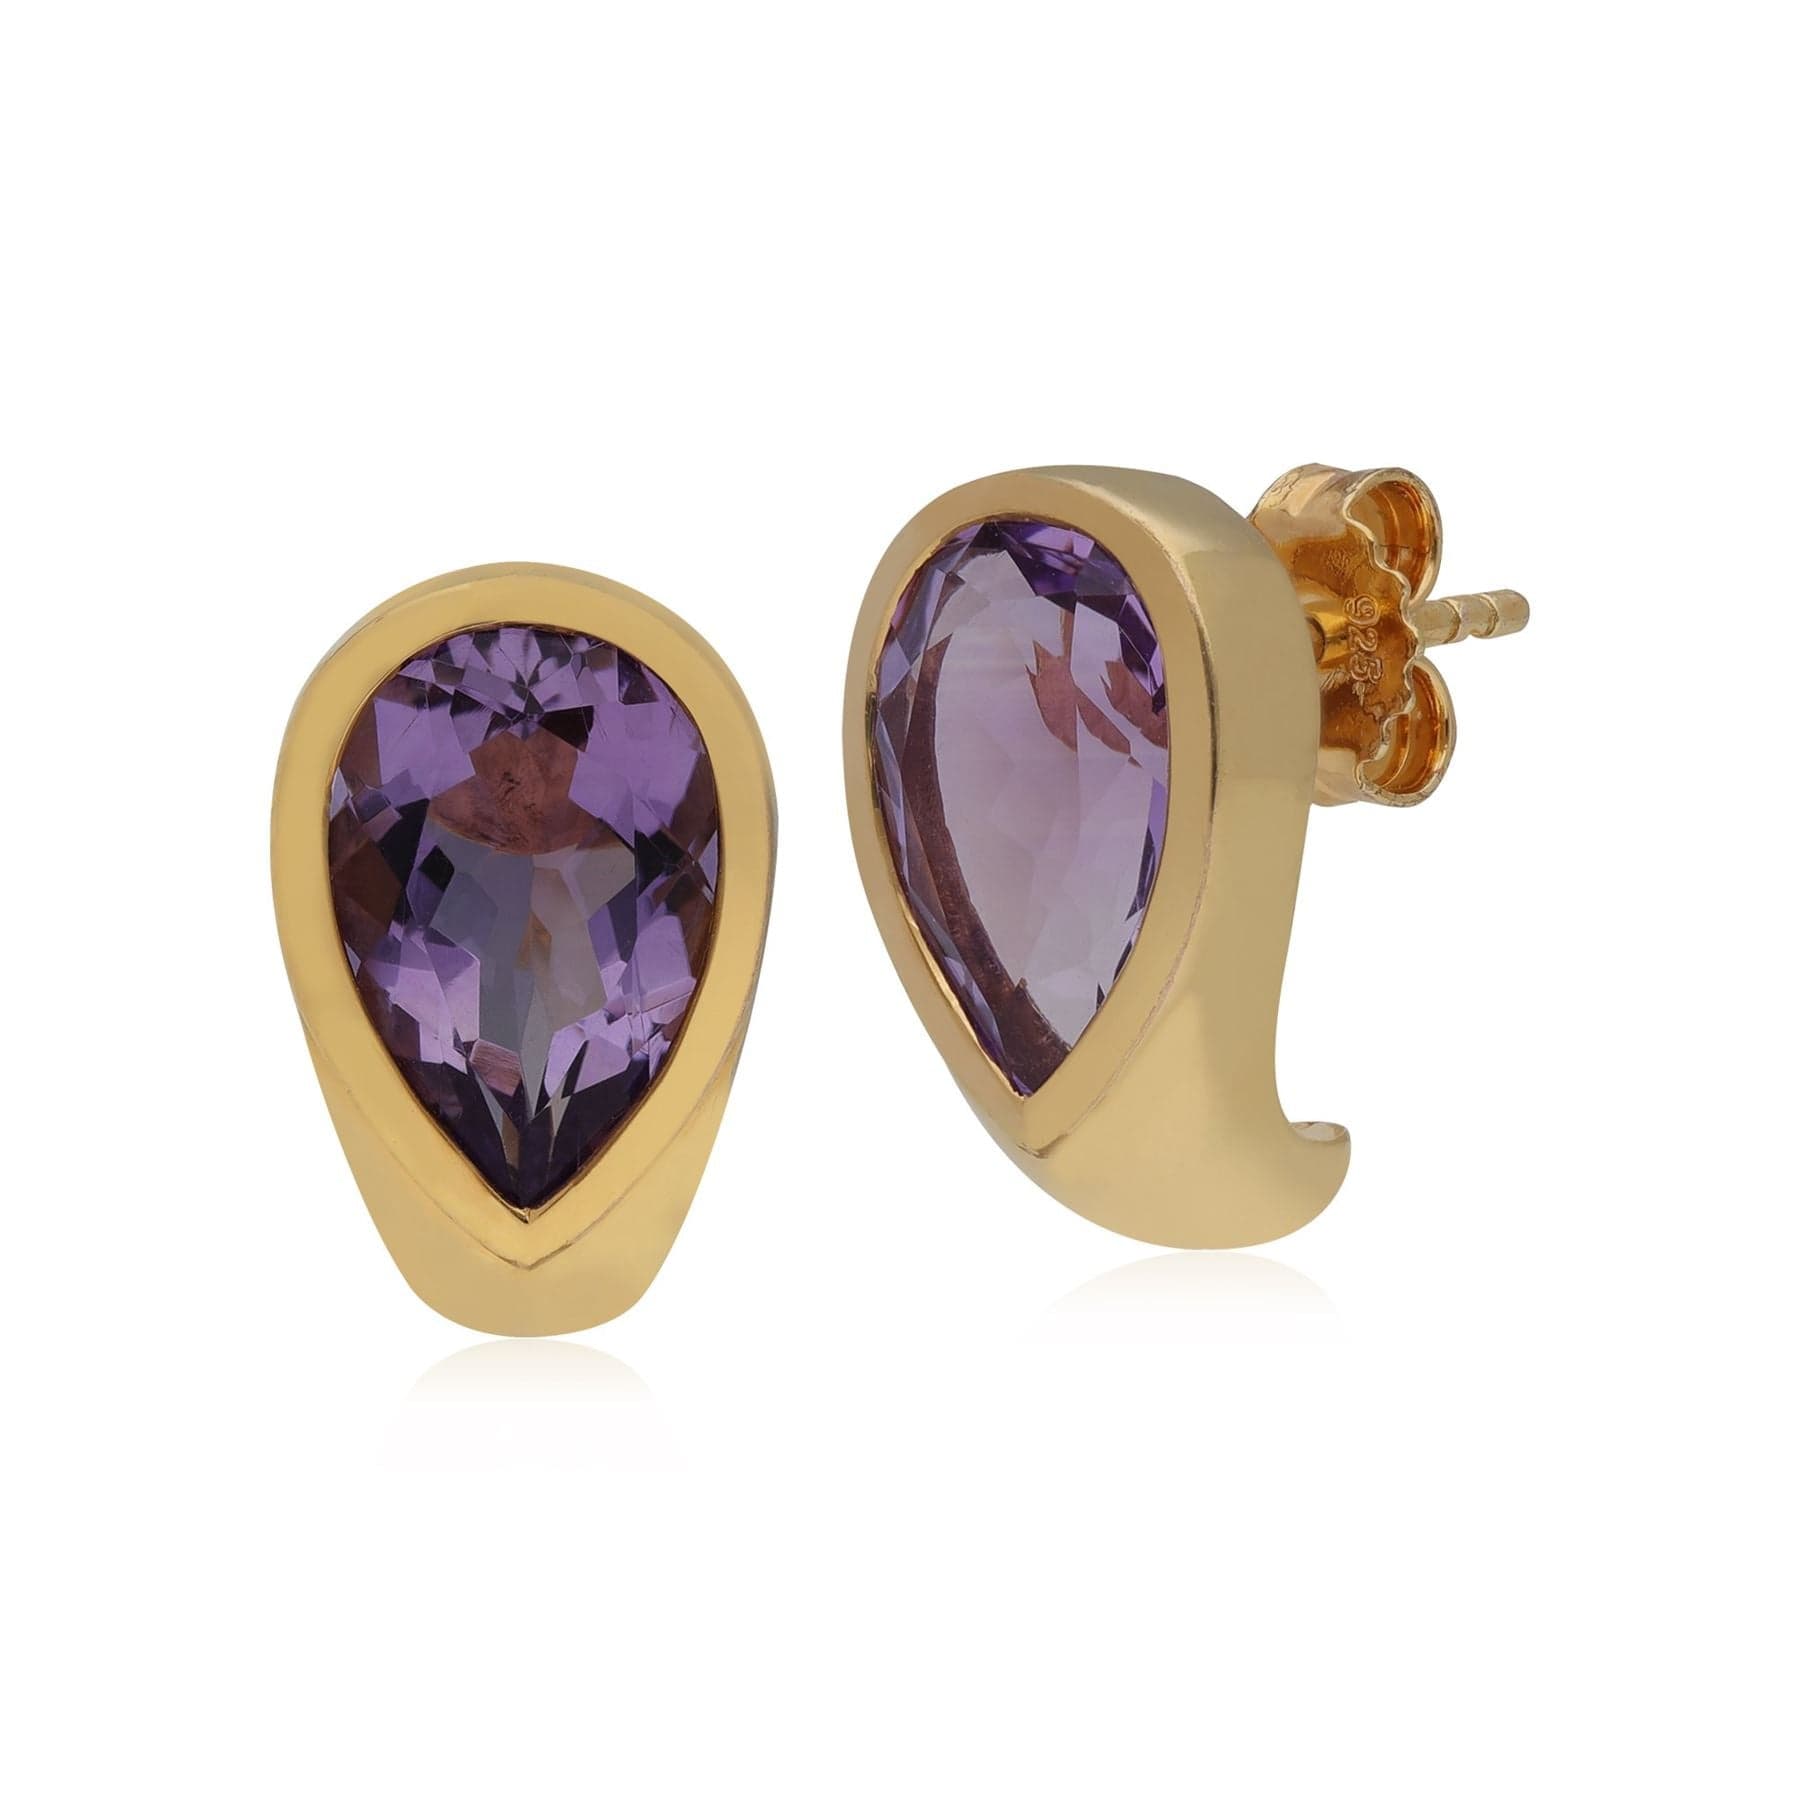 T1037E9011 Kosmos Amethyst Earrings in Yellow Gold Plated Sterling Silver 1